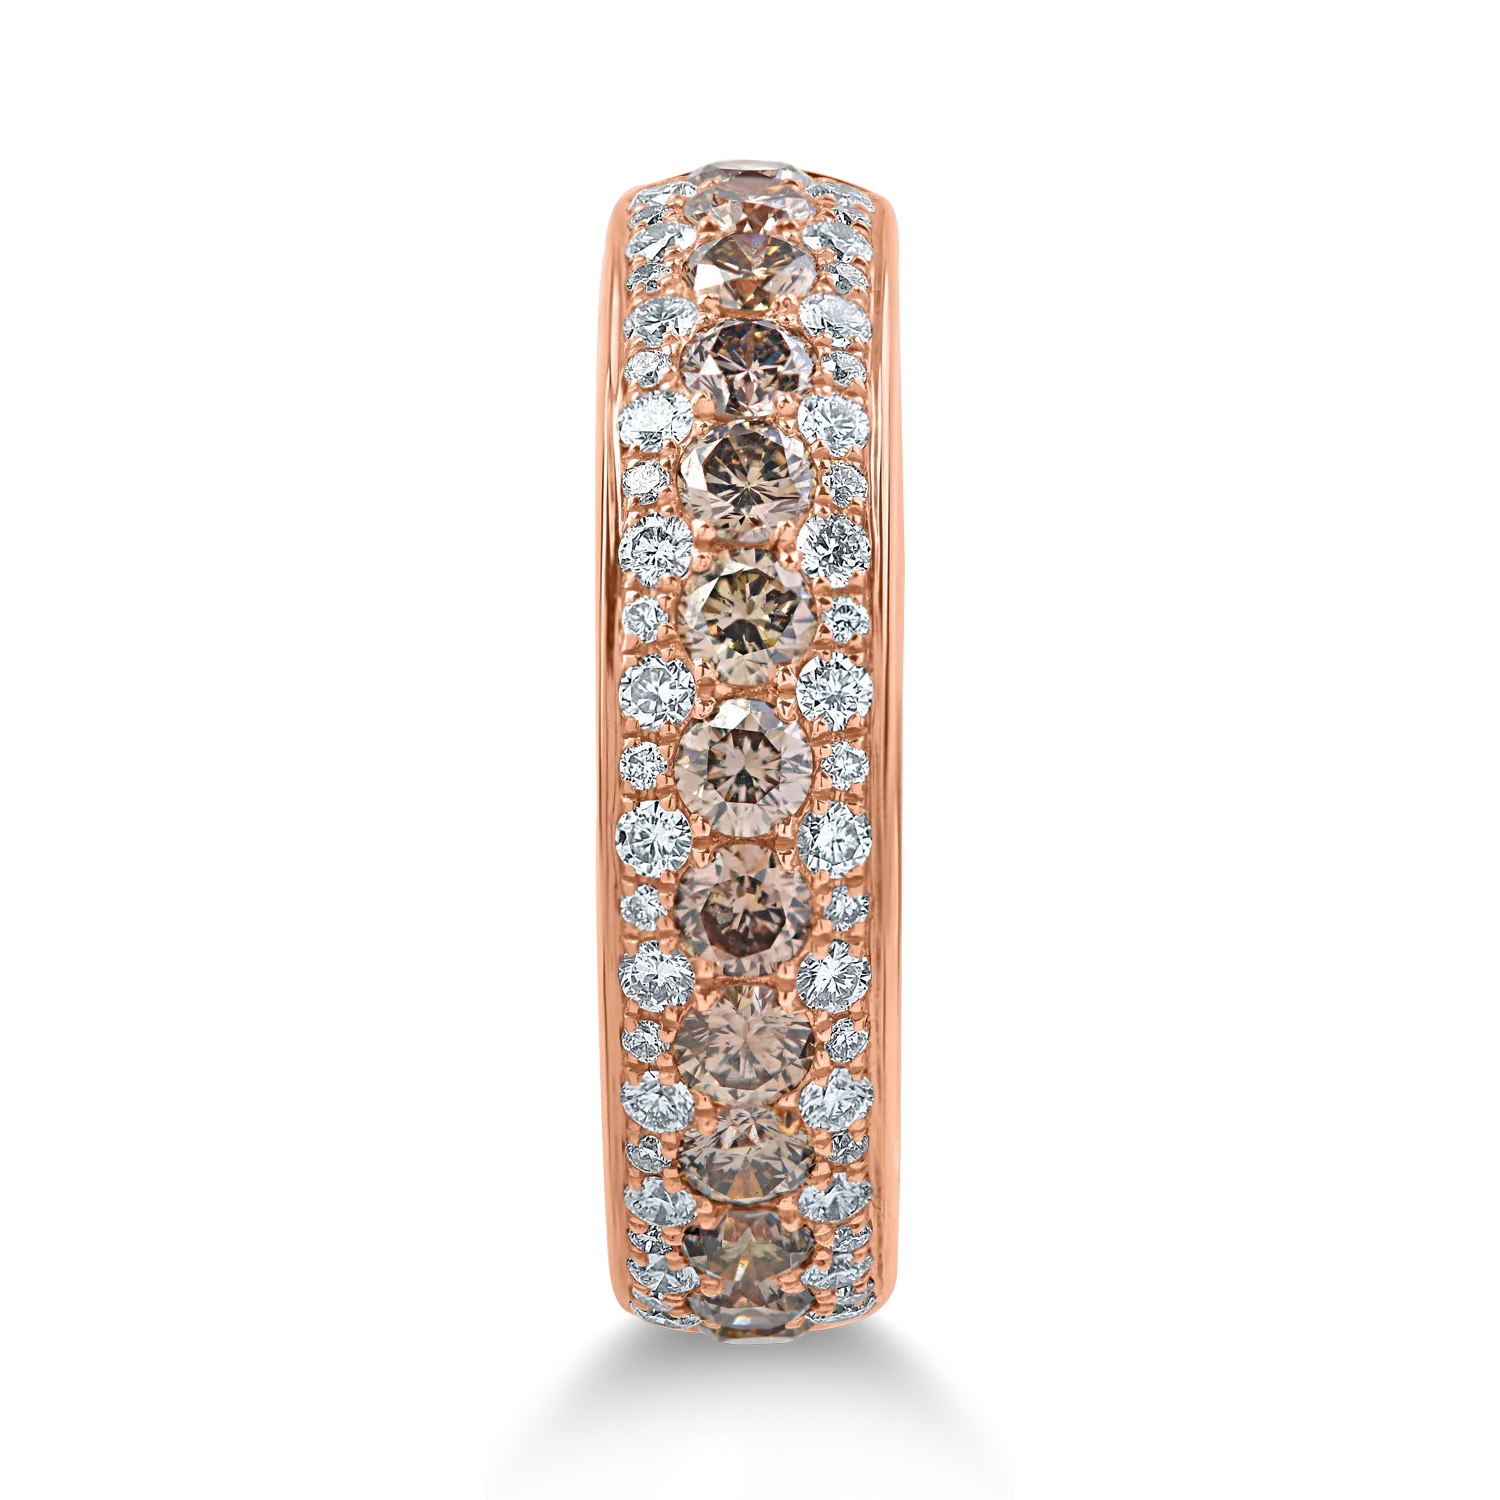 Rose gold microsetting ring with 0.9ct brown diamonds and 0.3ct clear diamonds